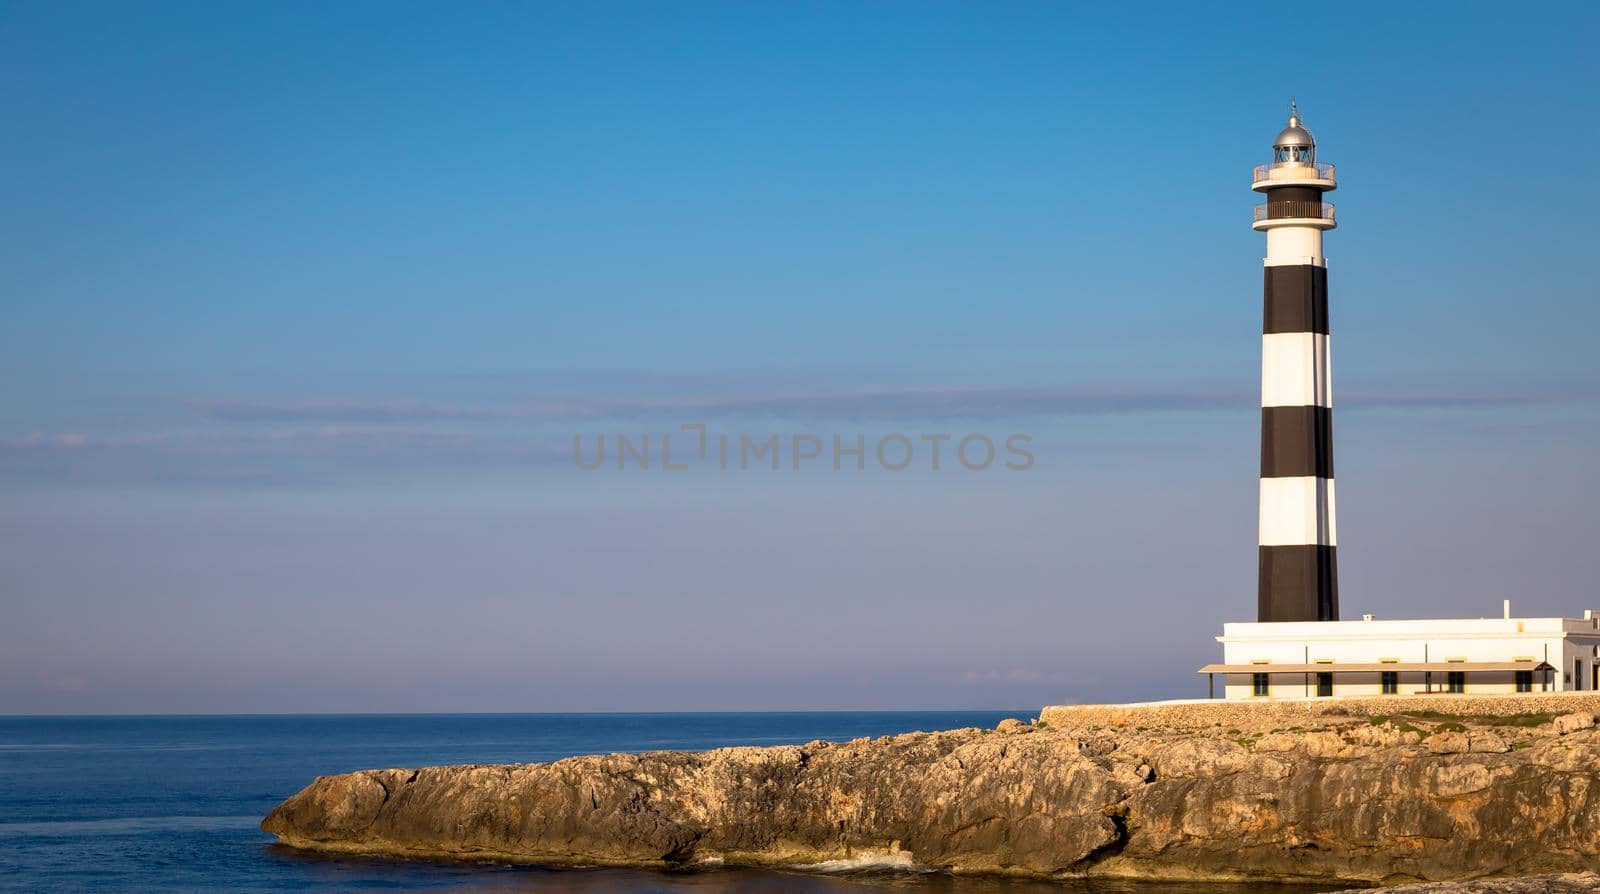 Scenic Artrutx Lighthouse at sunset in Minorca, Spain by Perseomedusa